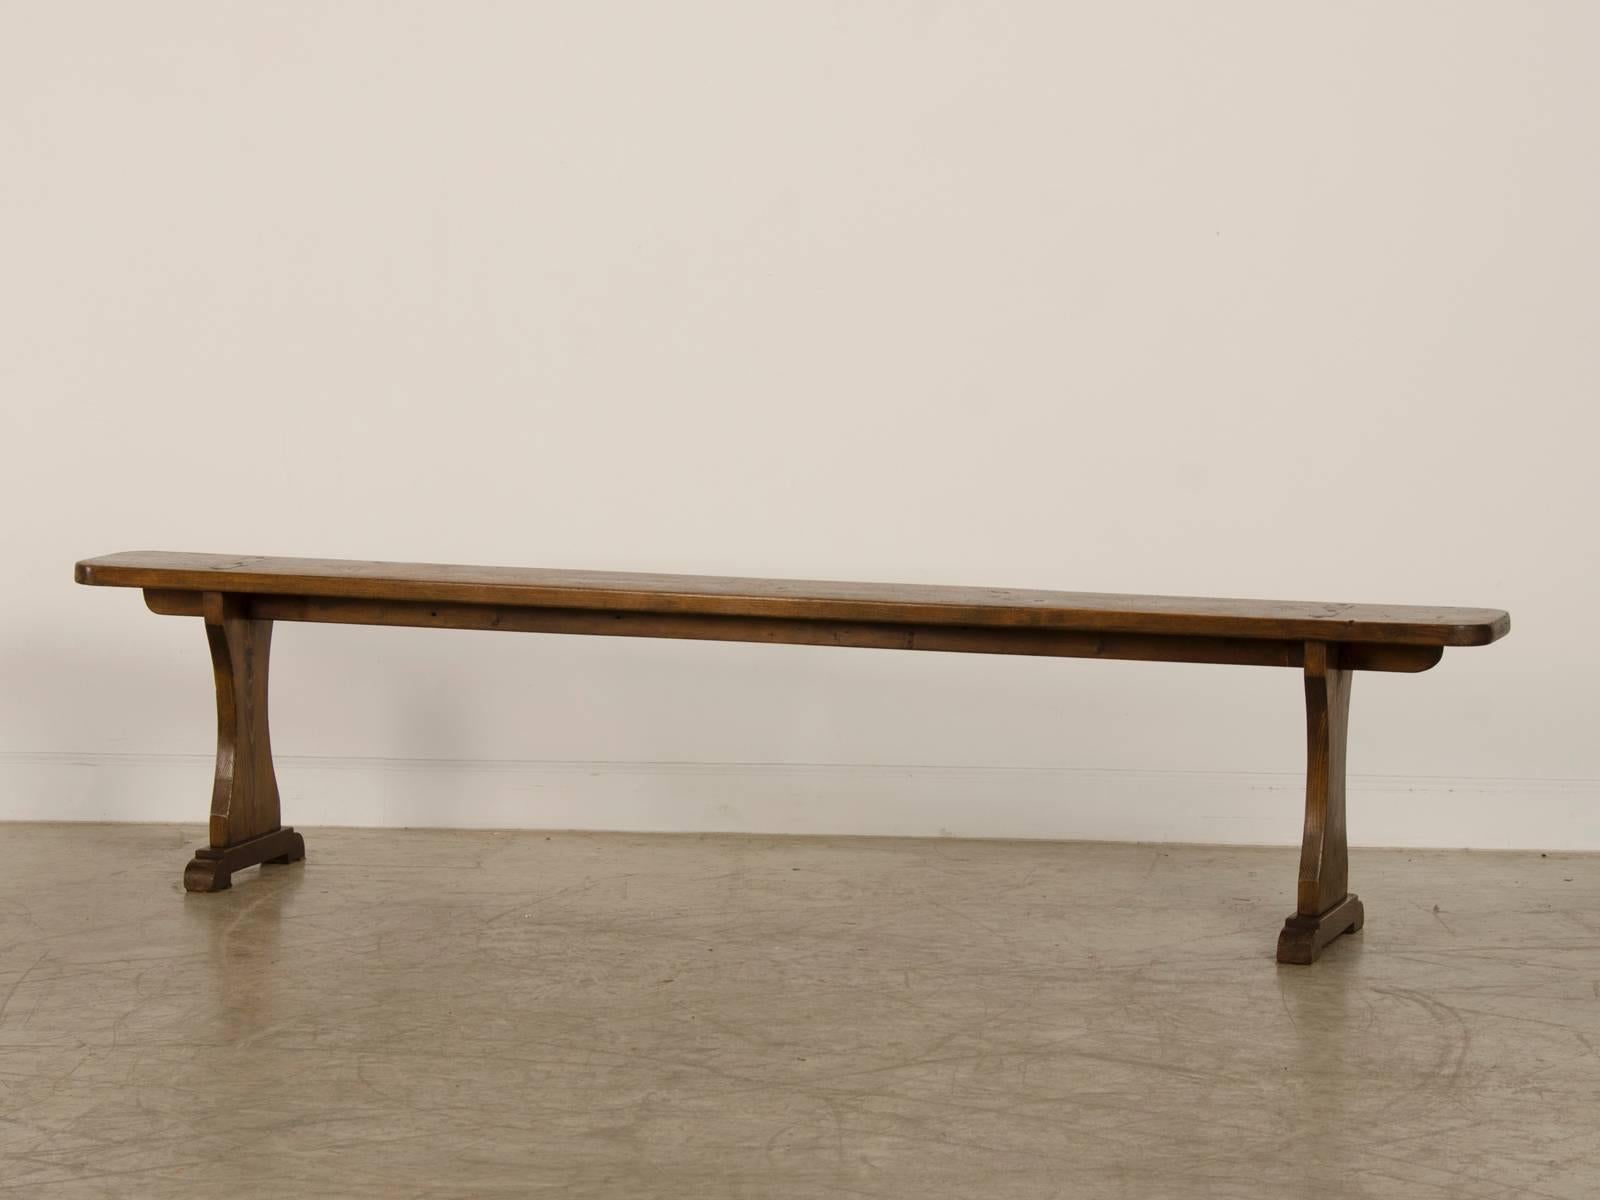 Country Long, Shallow Solid Pine English Bench, Two Shaped Support Legs, circa 1840